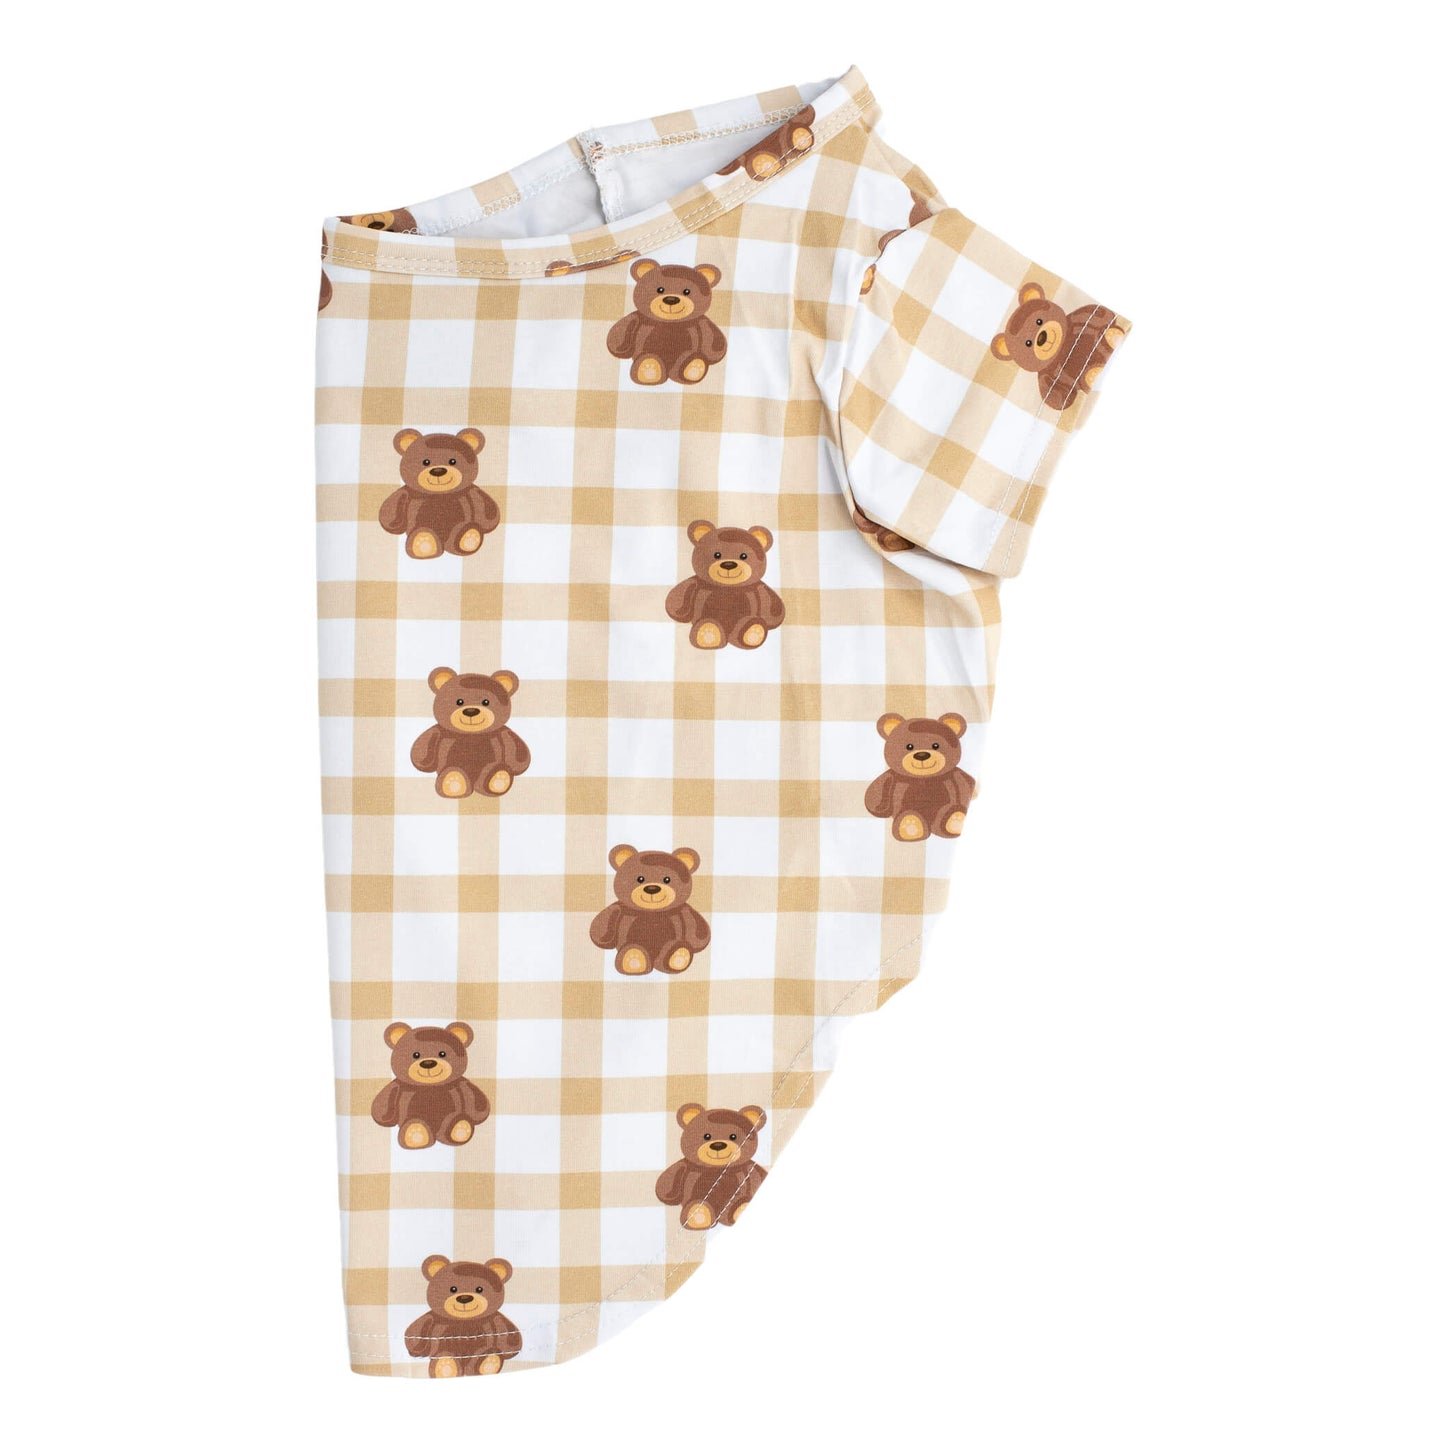 Side profile of Vibrant Hounds Teddy Bear pyjamas for dogs. It is brown and white gingham with teddy bears pritned on it.